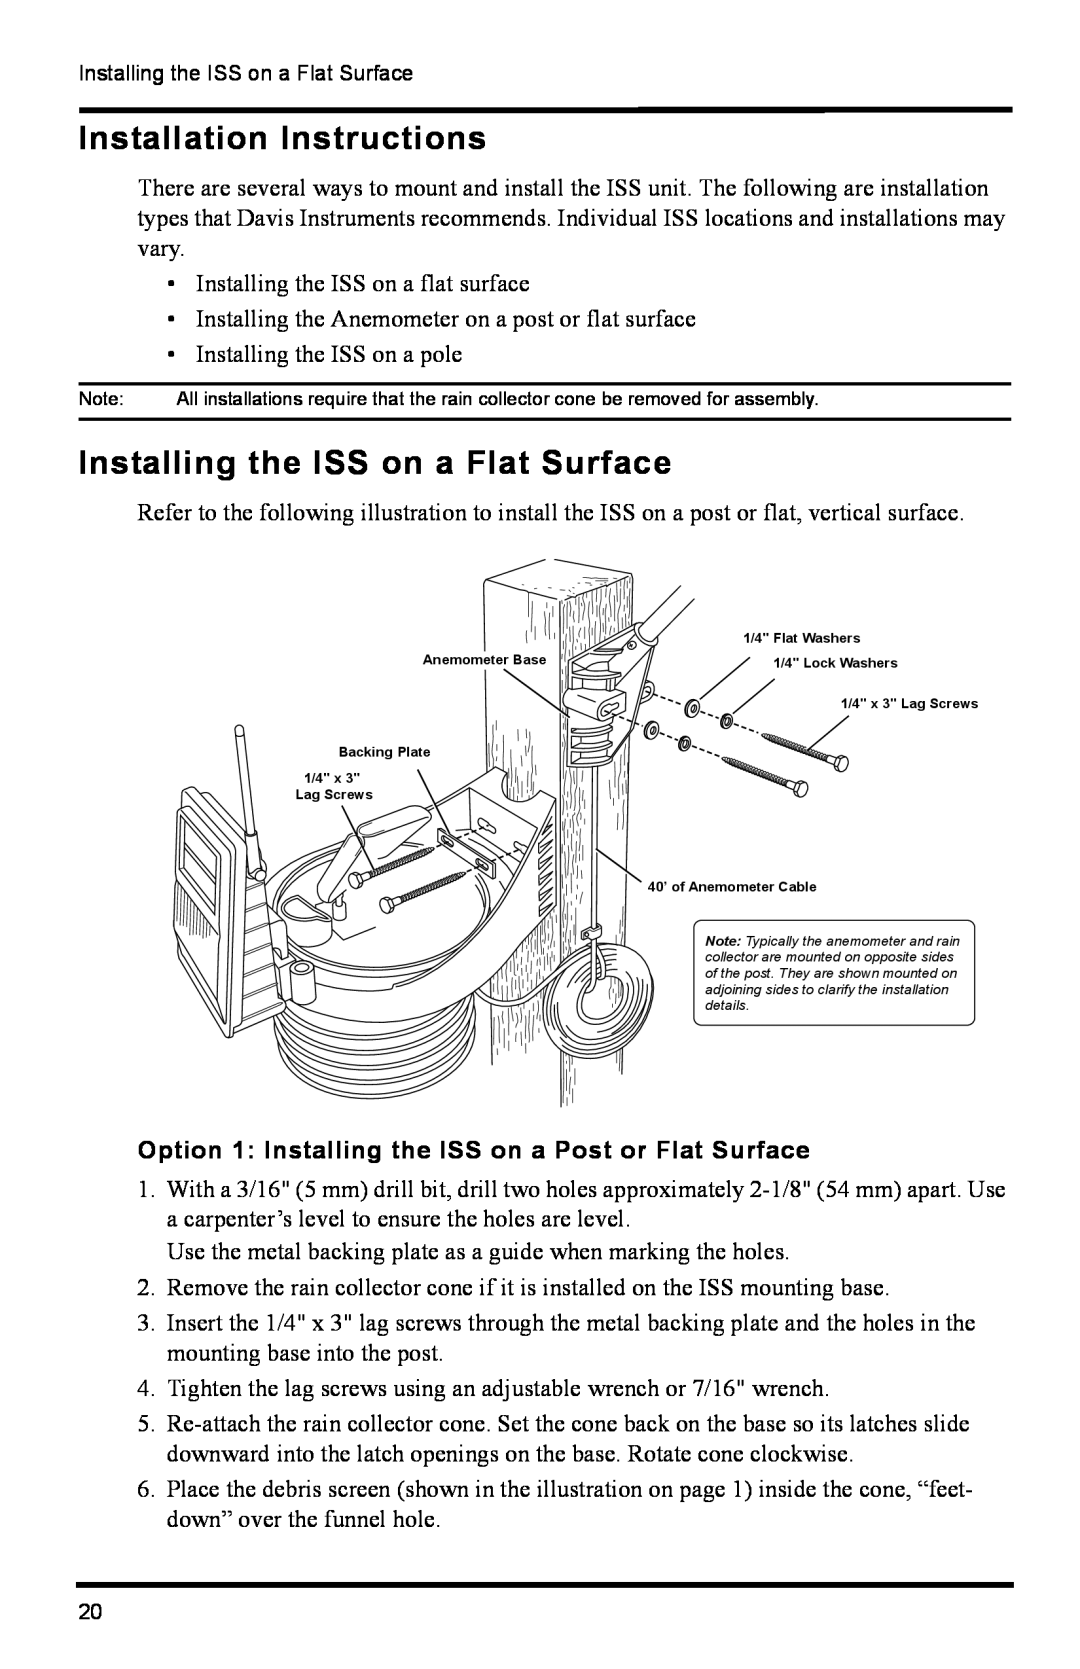 DAVIS 6322C installation manual Installation Instructions, Installing the ISS on a Flat Surface 